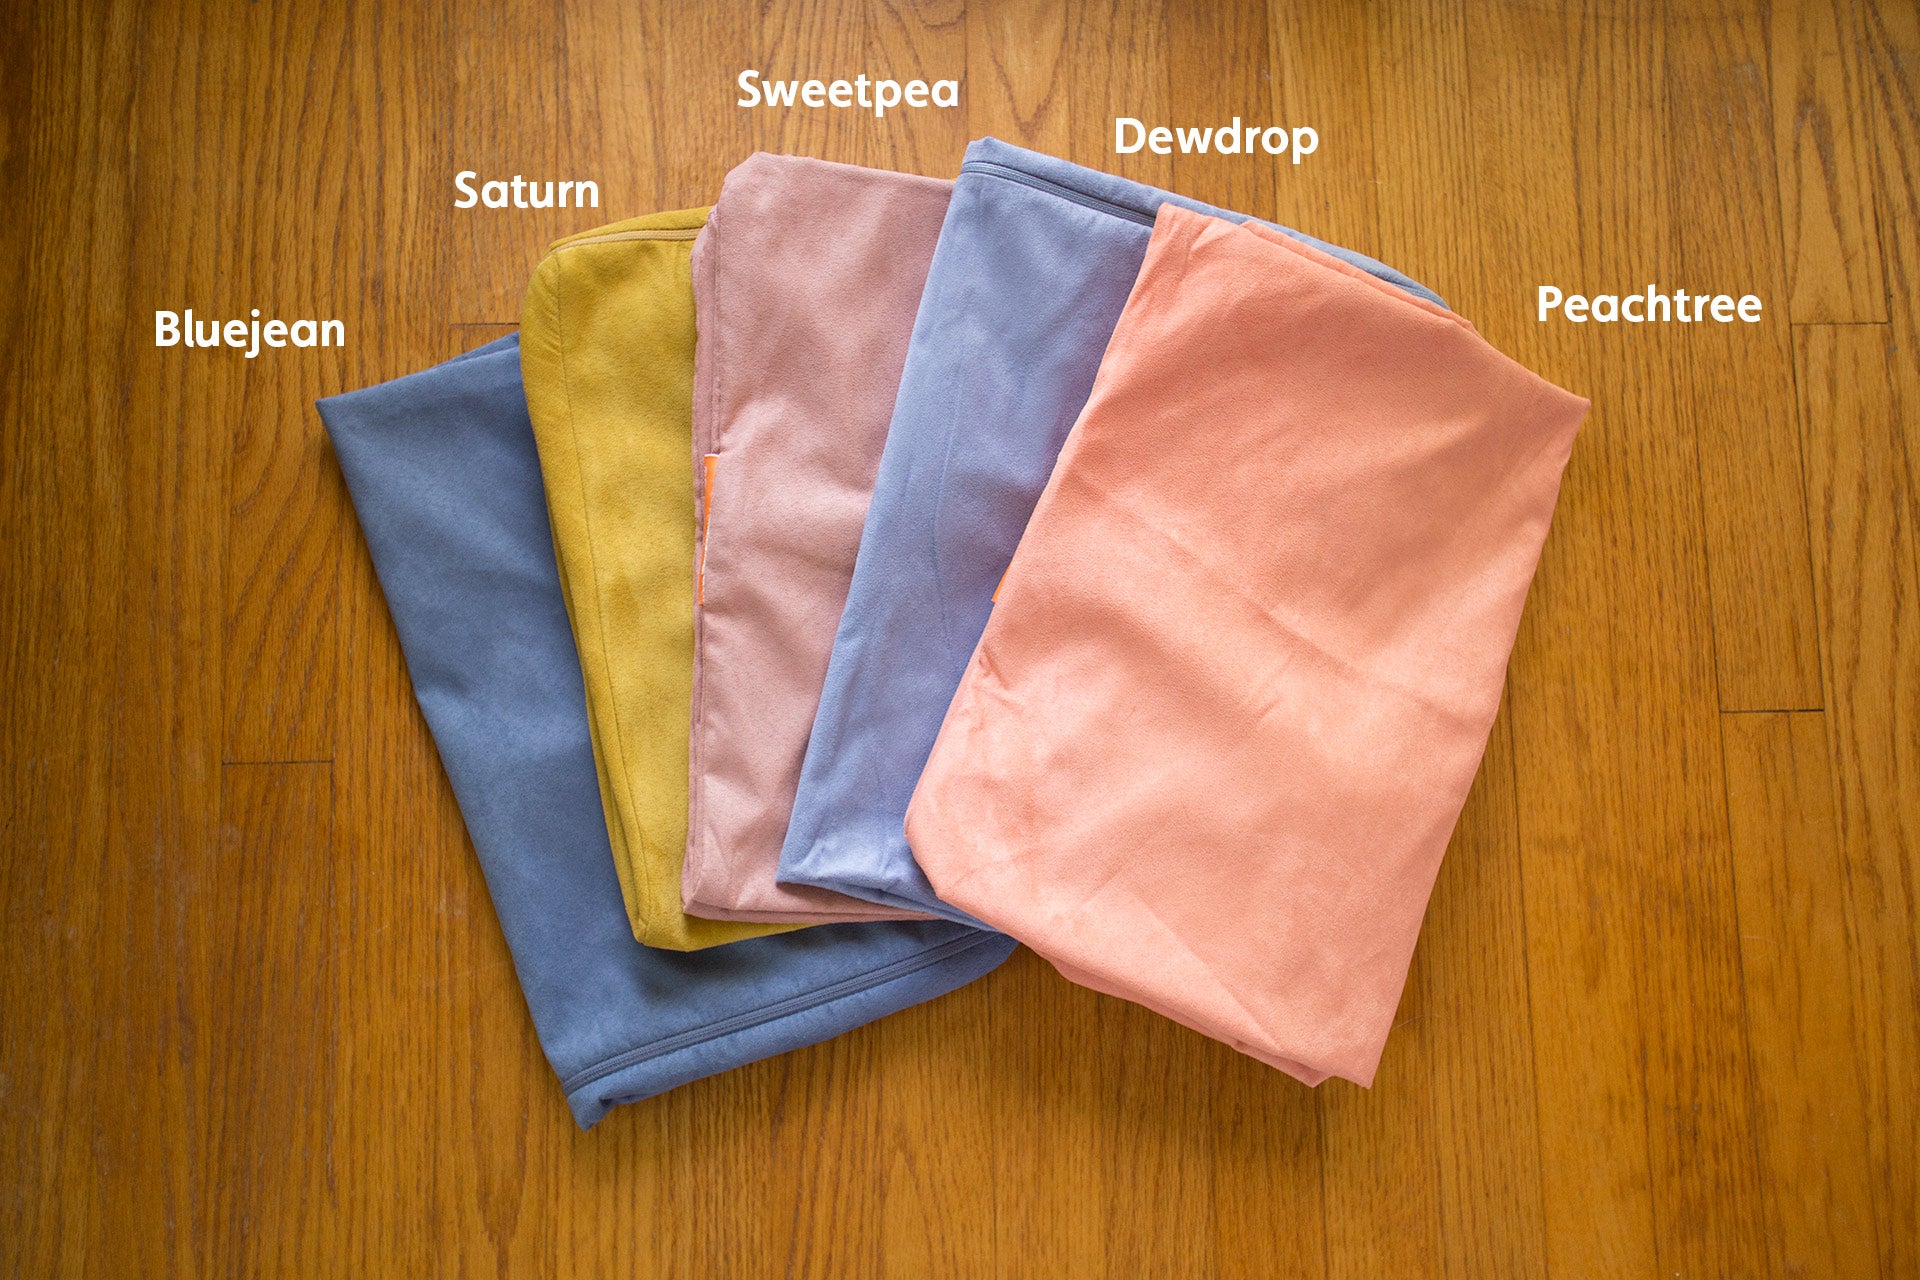 Bluejean, Saturn. Sweetpea, Dewdrop and peachtree covers comparing colors